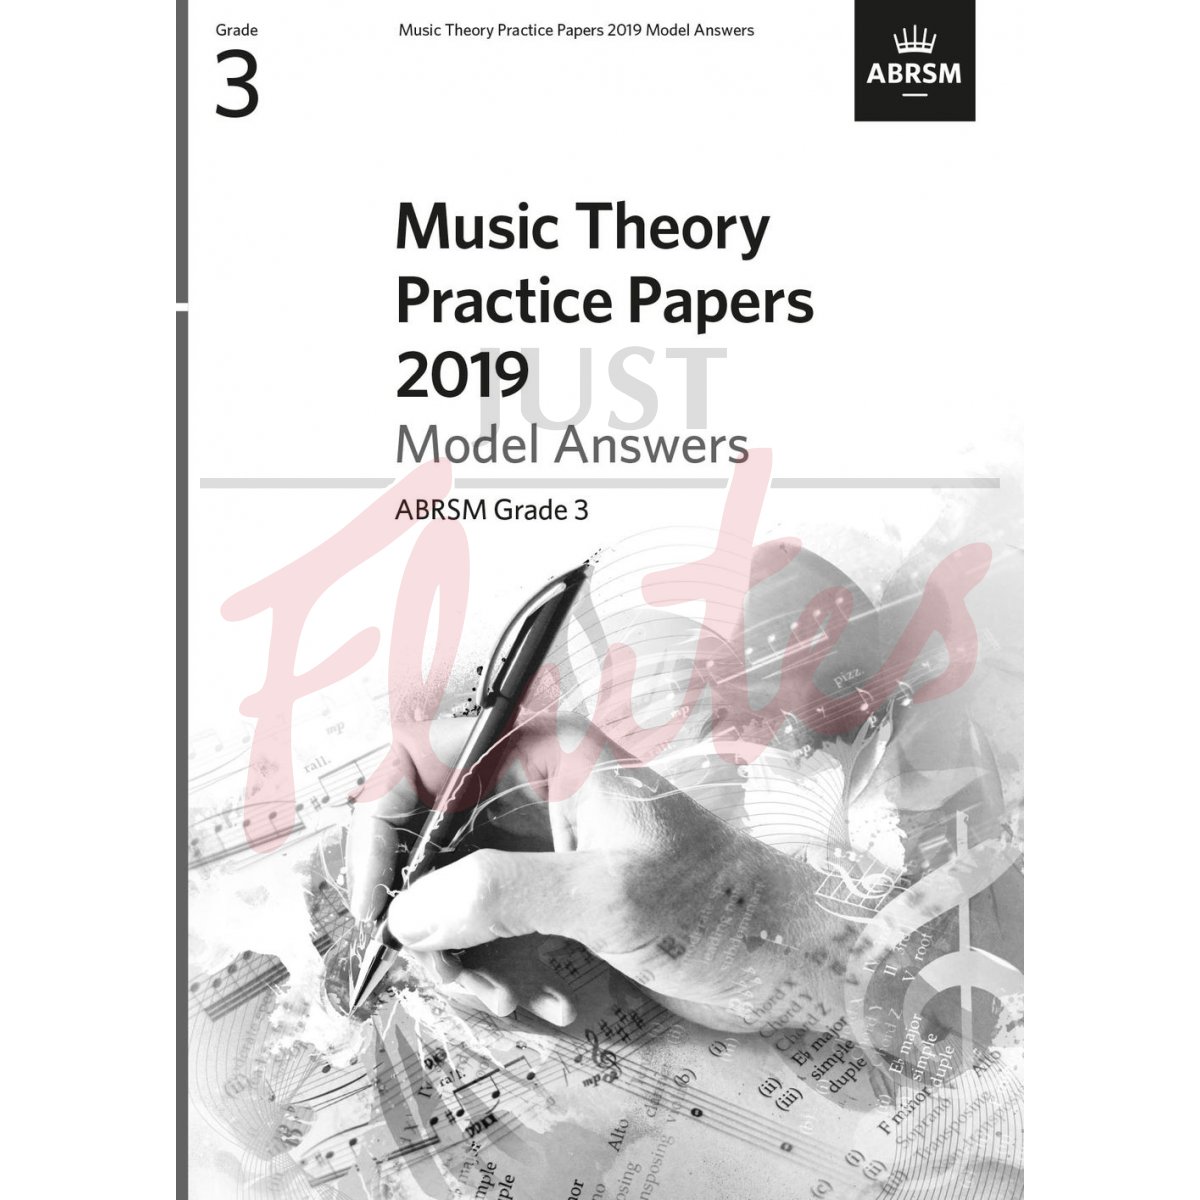 Music Theory Practice Papers 2019 Grade 3 - Model Answers